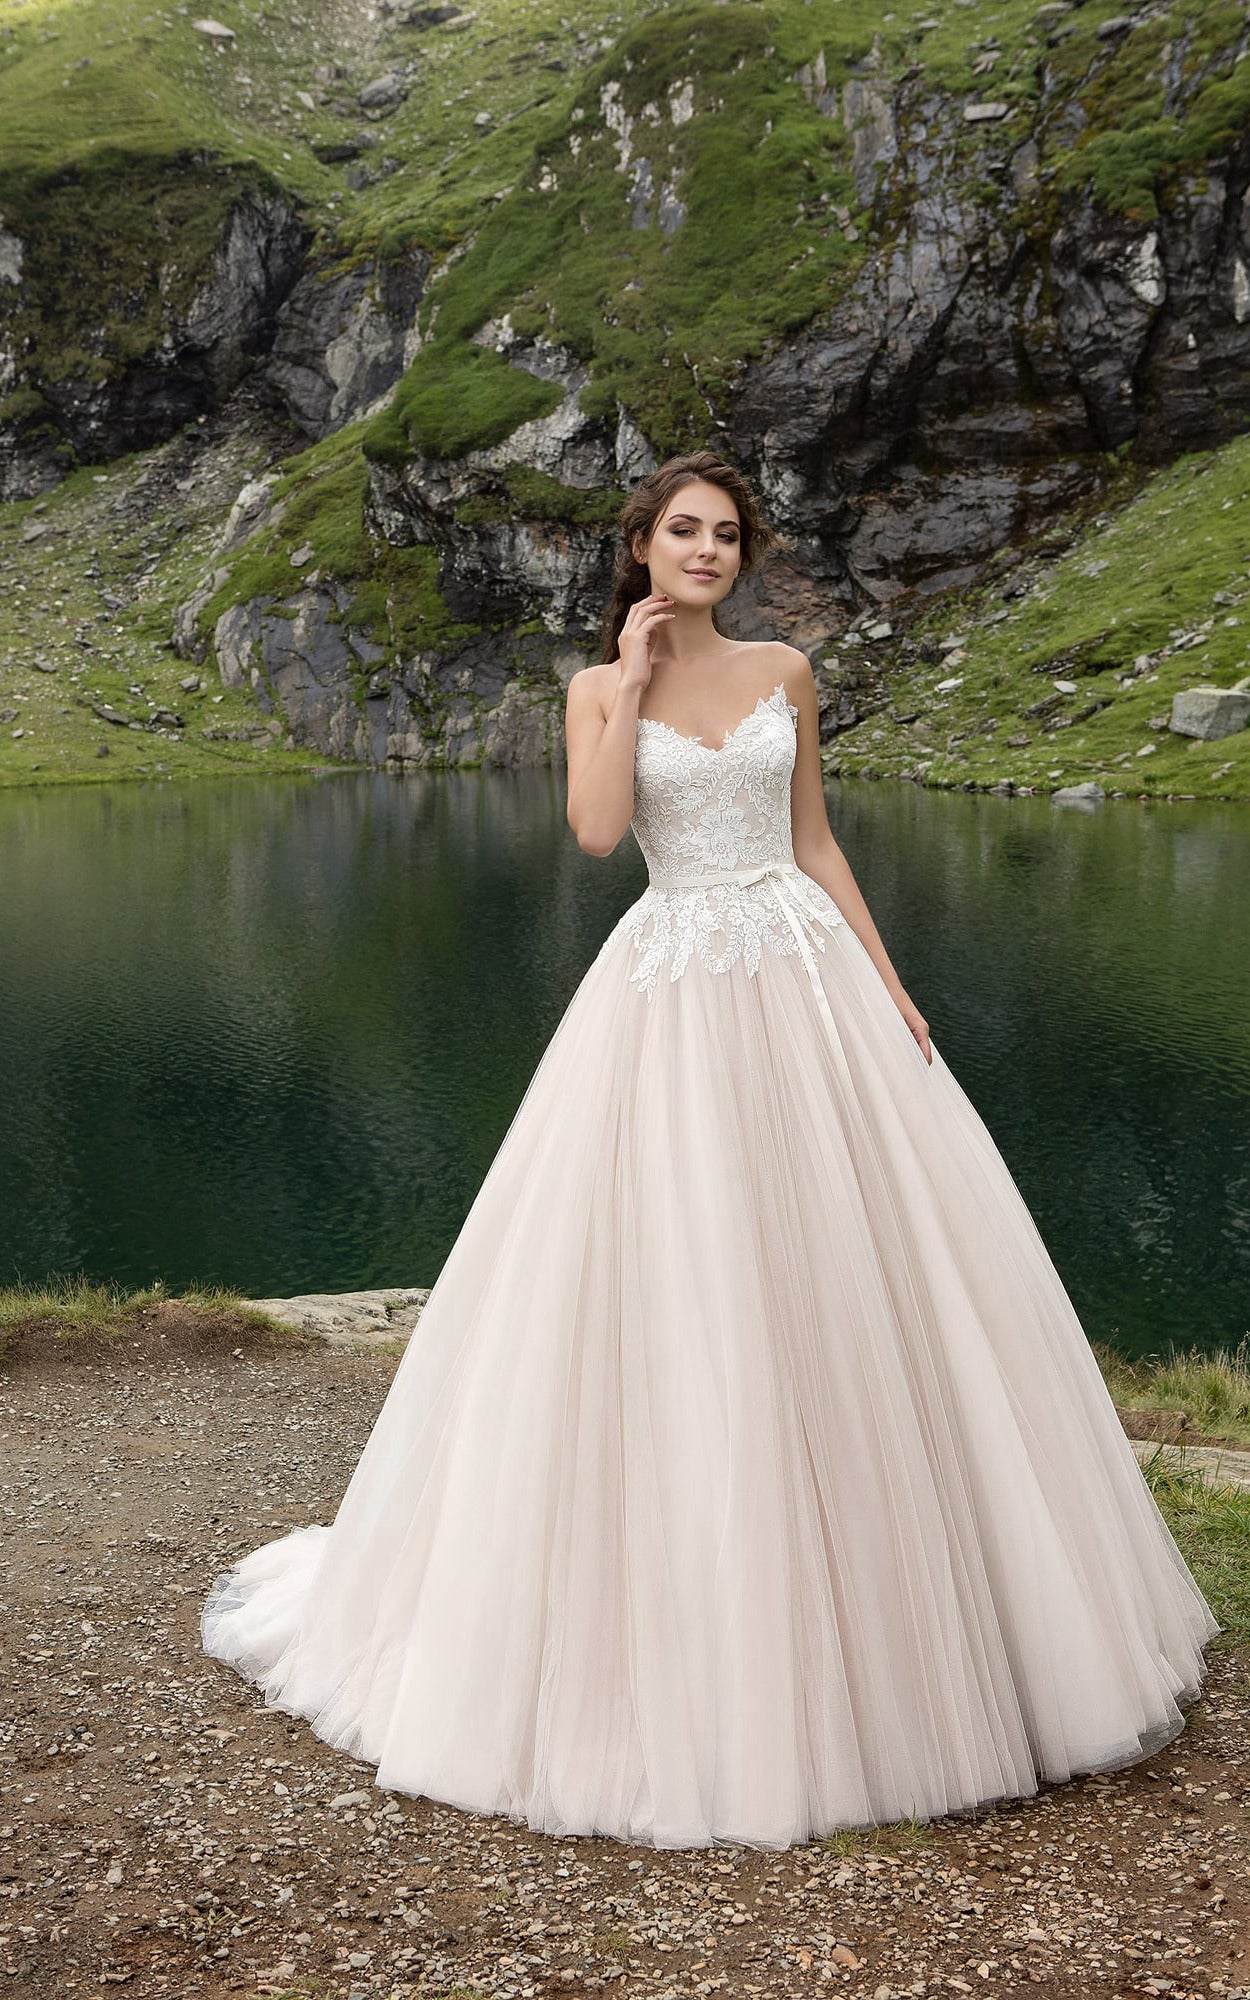 Tulle Lace Bodice Pleatings Romantic V-Neckline Gown-714643